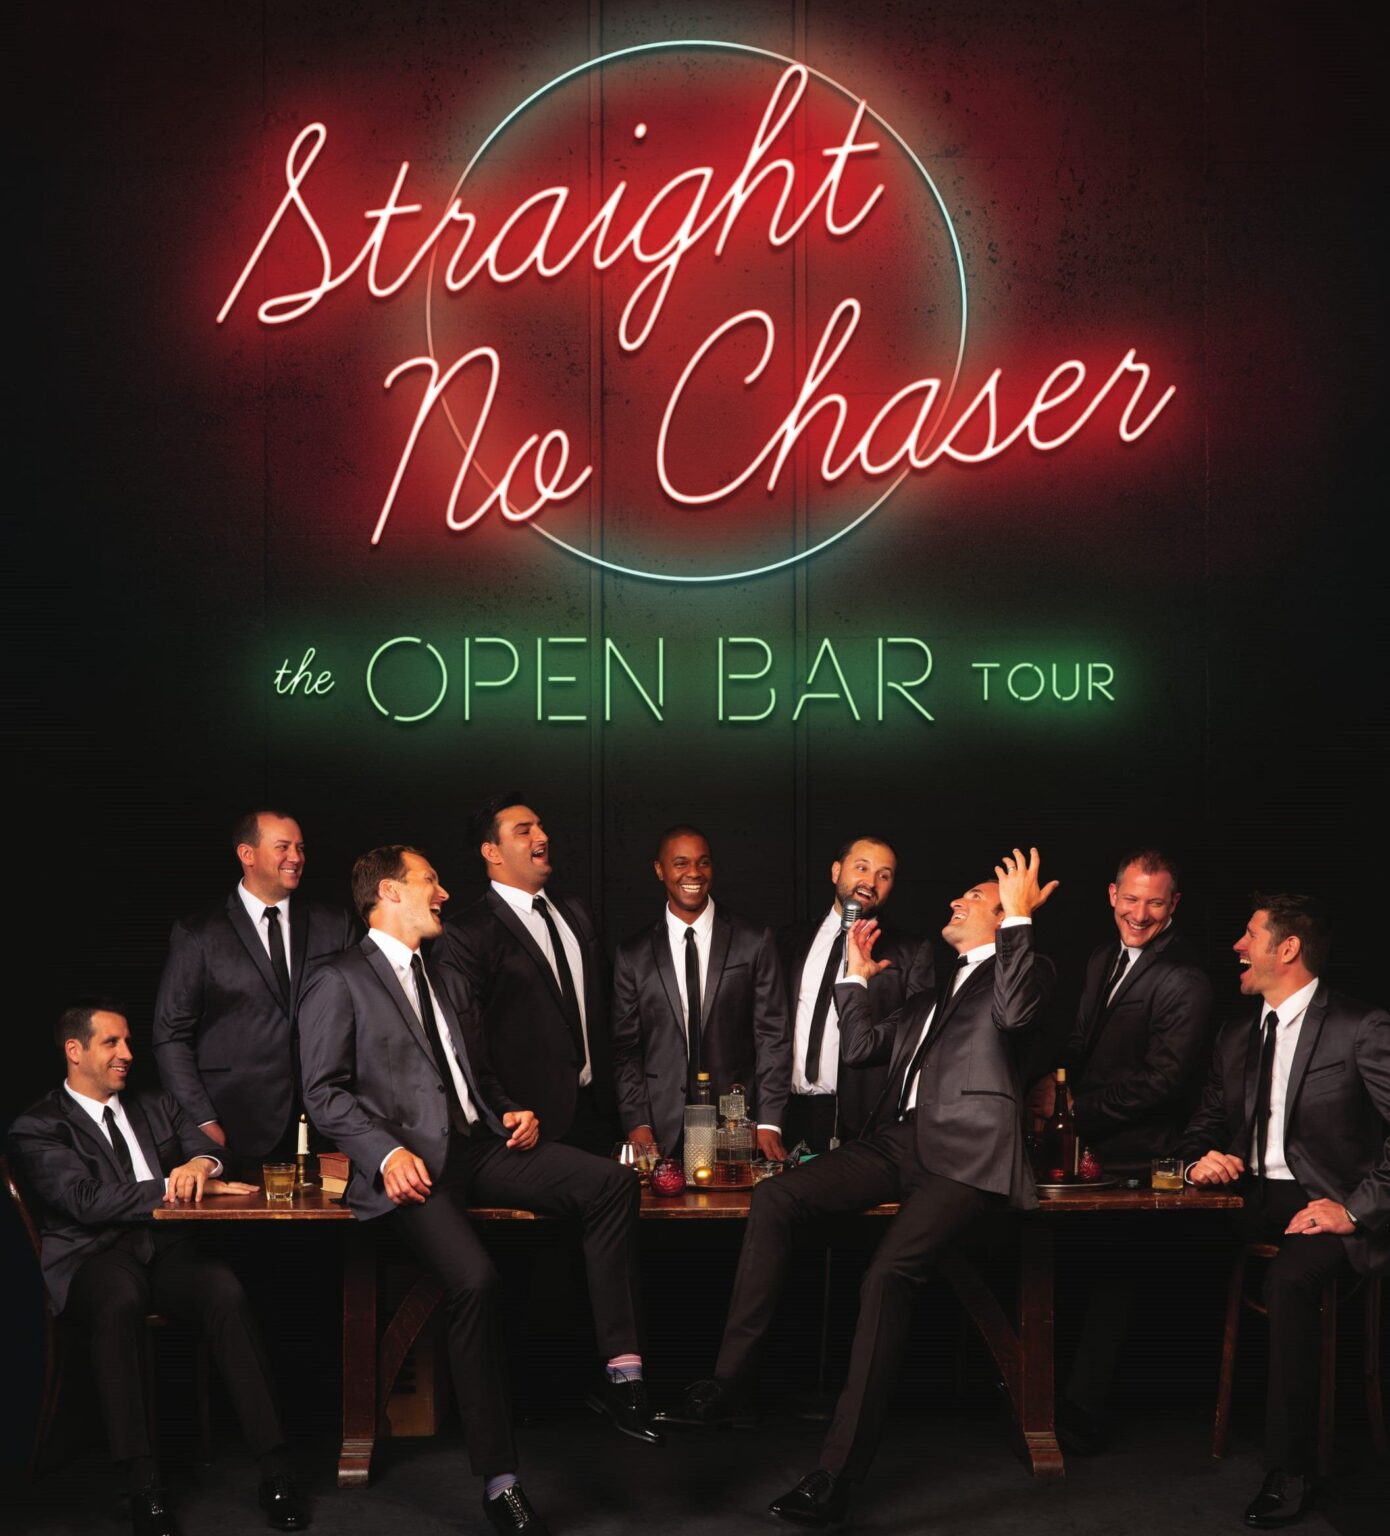 Acapella Group Straight No Chaser Returns to Weinberg Stage with Open